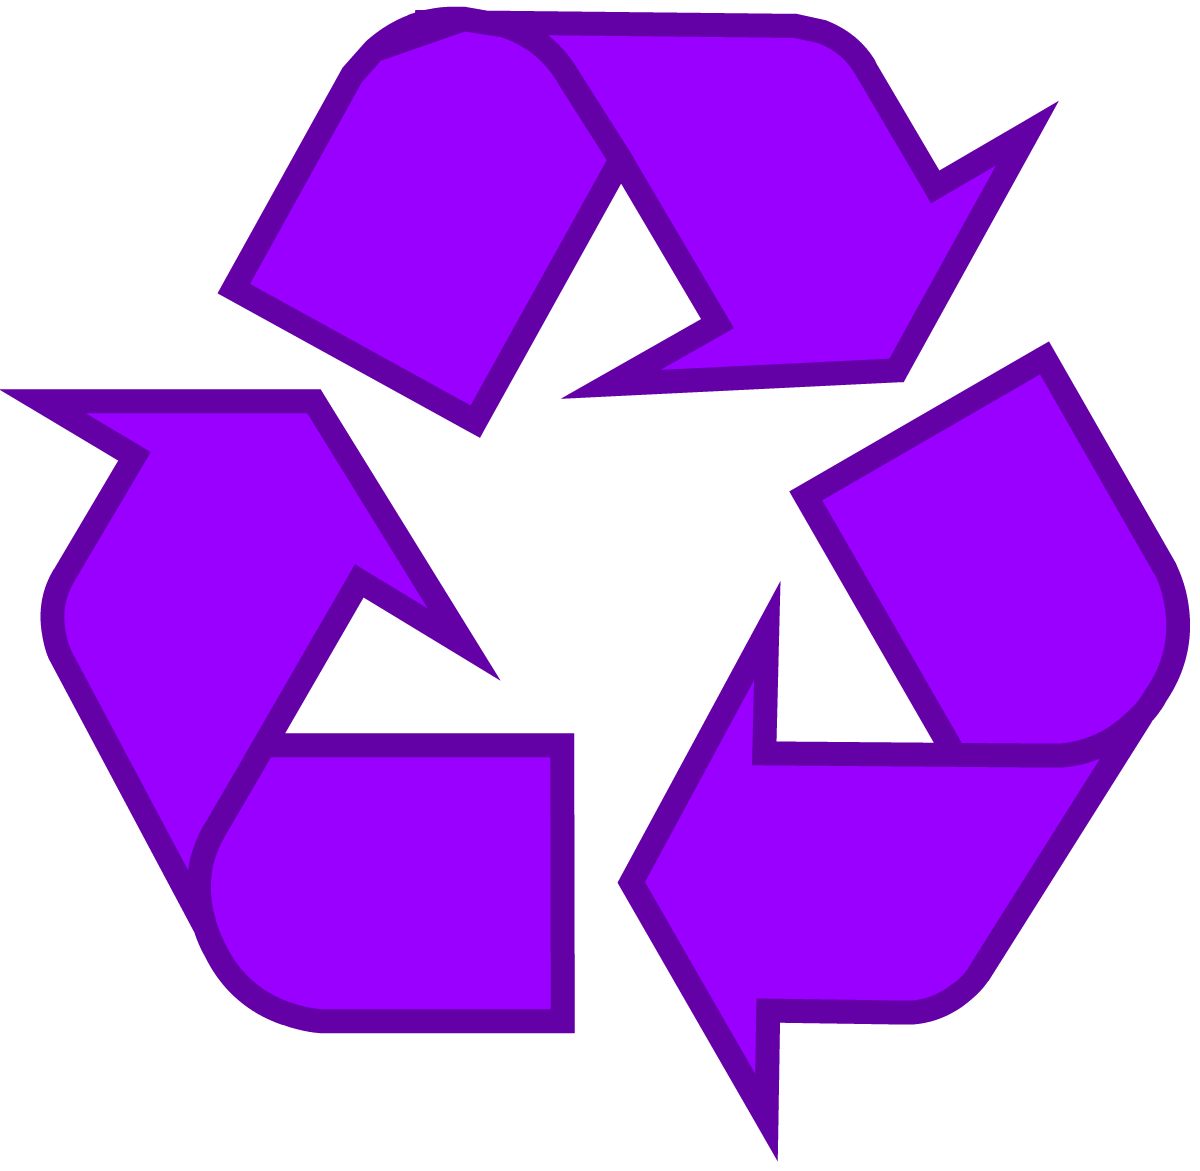 Purple Green and Blue Logo - Recycling Symbol - Download the Original Recycle Logo